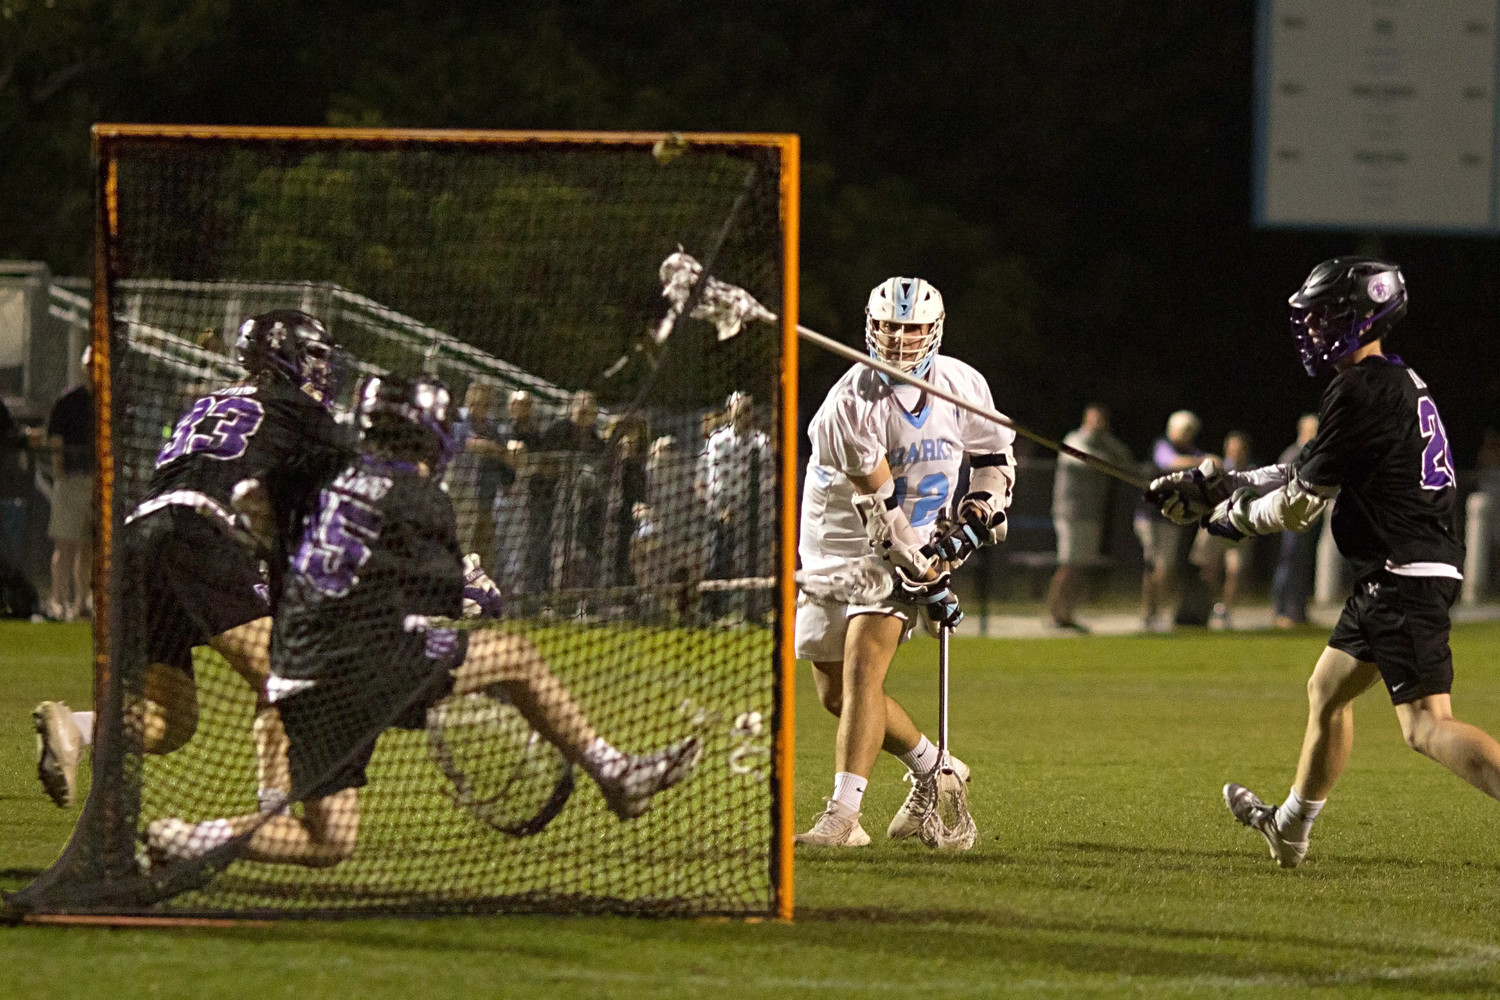 Walker Azzaro of the Sharks fires a low shot that is blocked by the Gonzaga goalie.